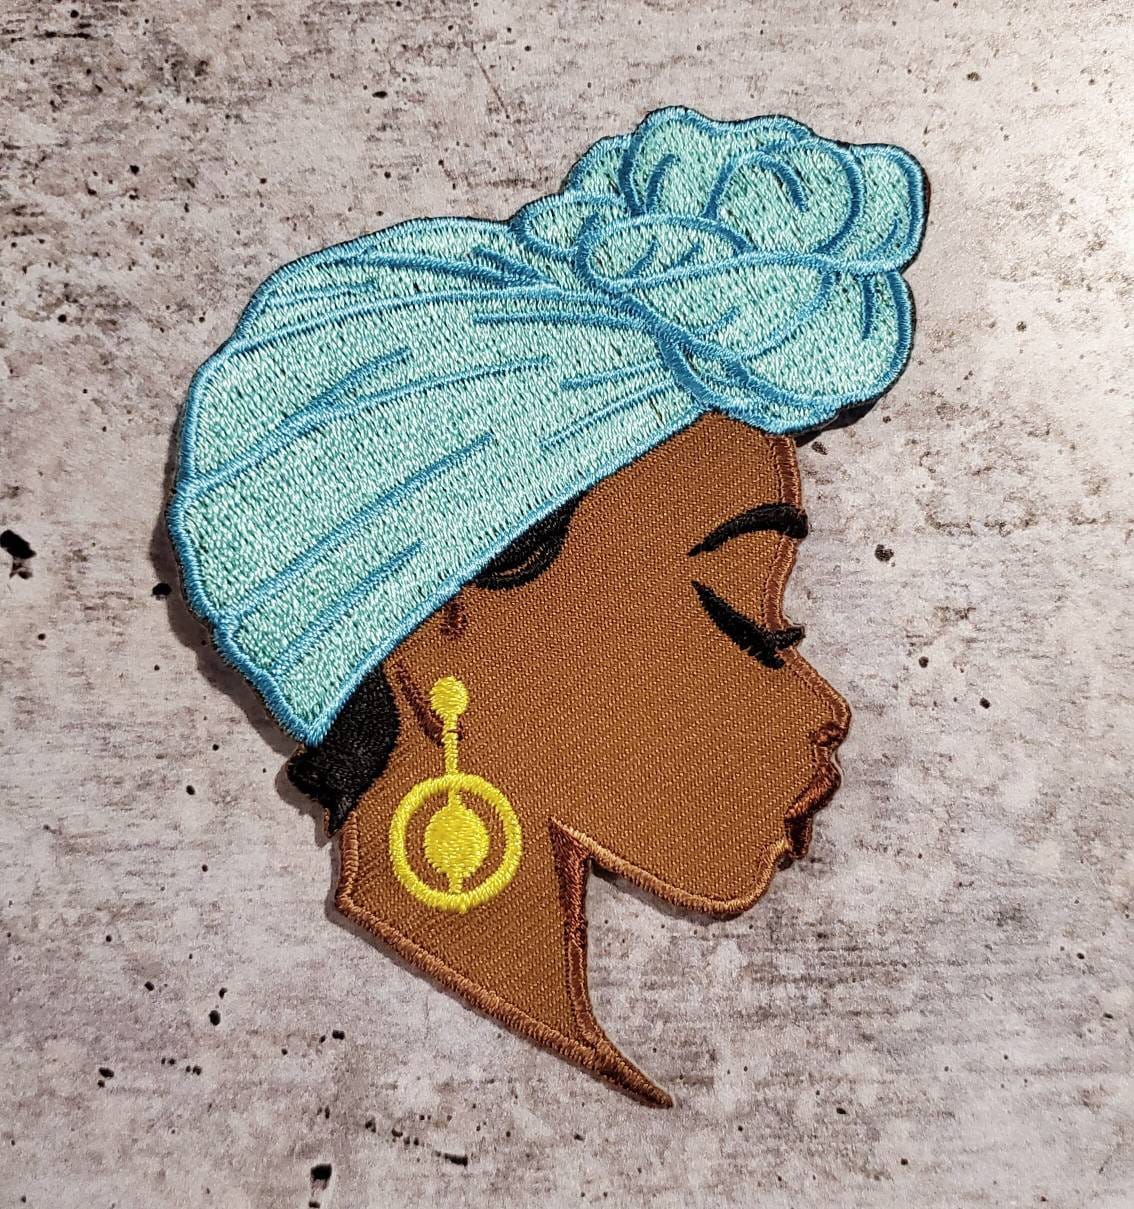 NEW, Meditating Cutie Embroidered Iron-on Patch, with "Aqua Head Wrap" Size 4", DIY Appliques and Craft Supplies for Clothing and Accessorie